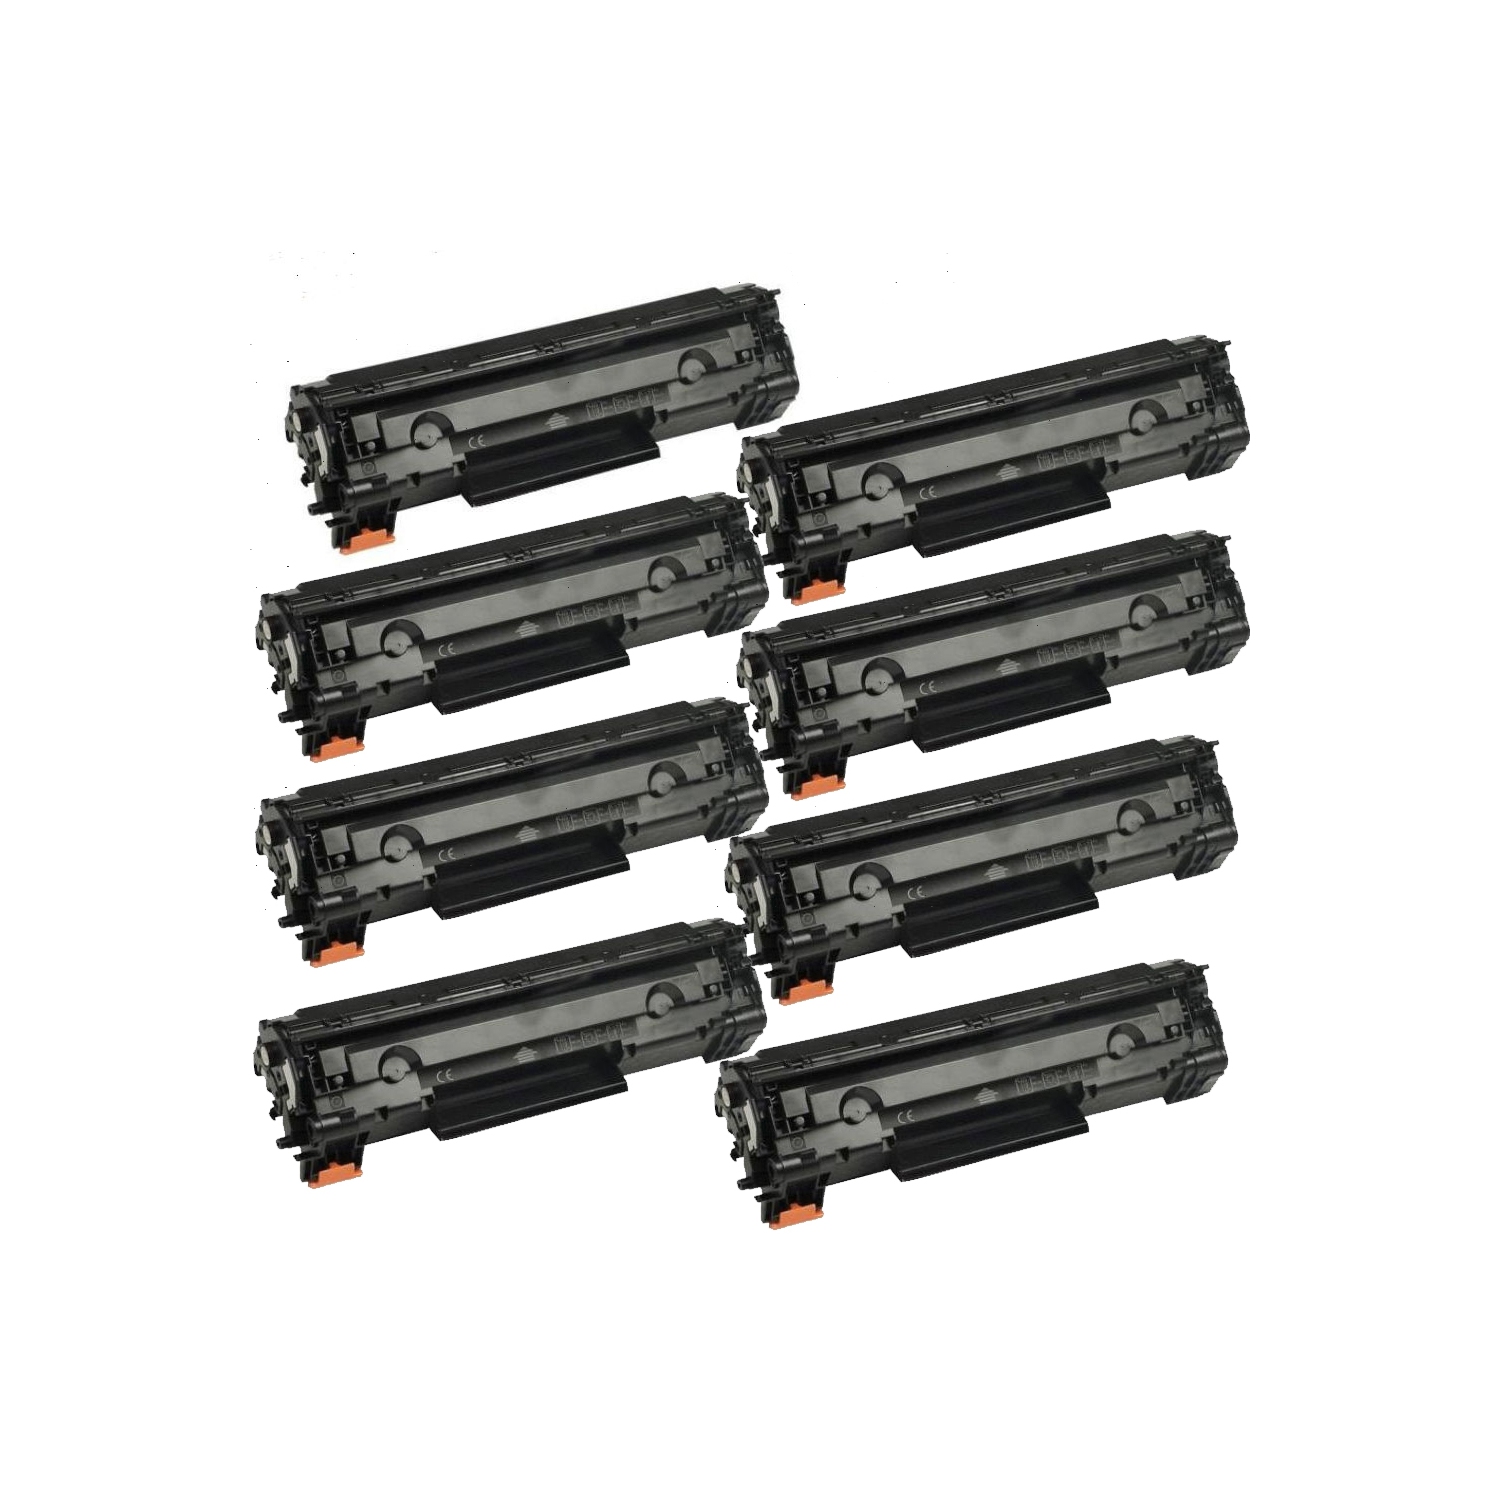 8PK CF283A Toner Cartridges replacement for HP 83A, HP CF283A LaserJet Pro MFP M127fn,M127fw, M125nw,M125rnw,M225dn,M201dw